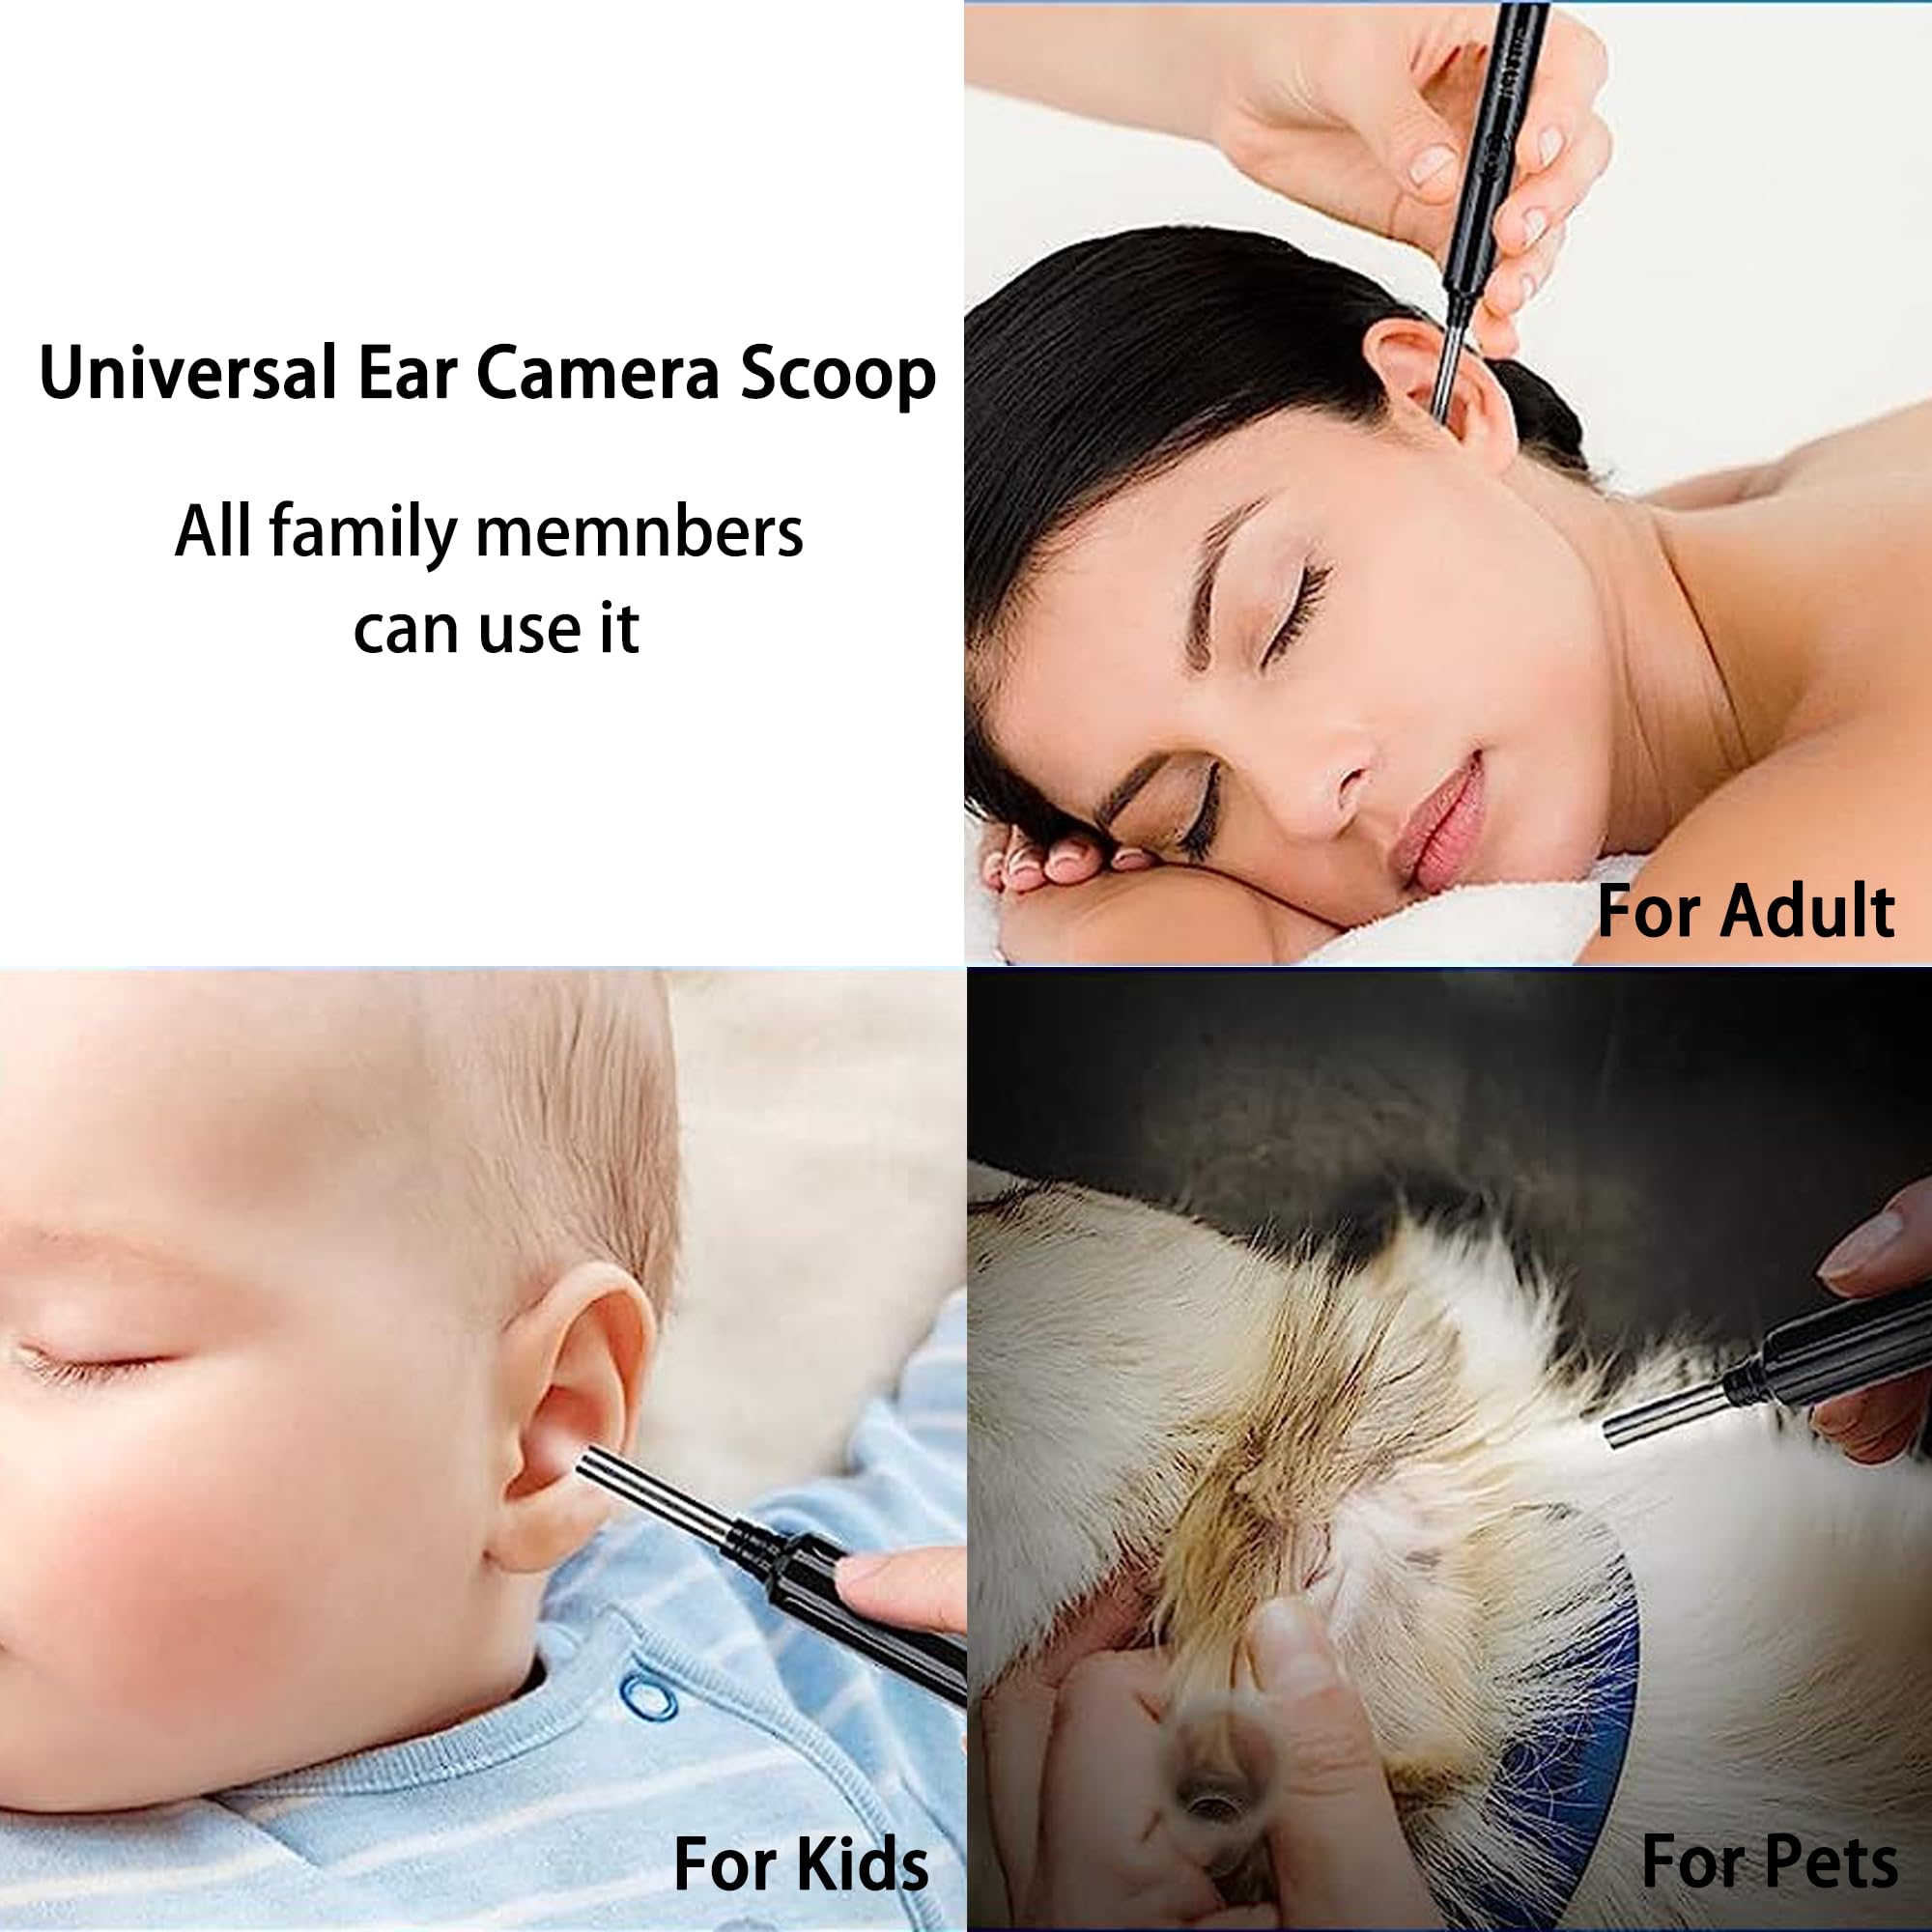 Ear Wax Removal with Camera - Smart Ear Canal Explorer, HD Imaging for Effective Cleaning